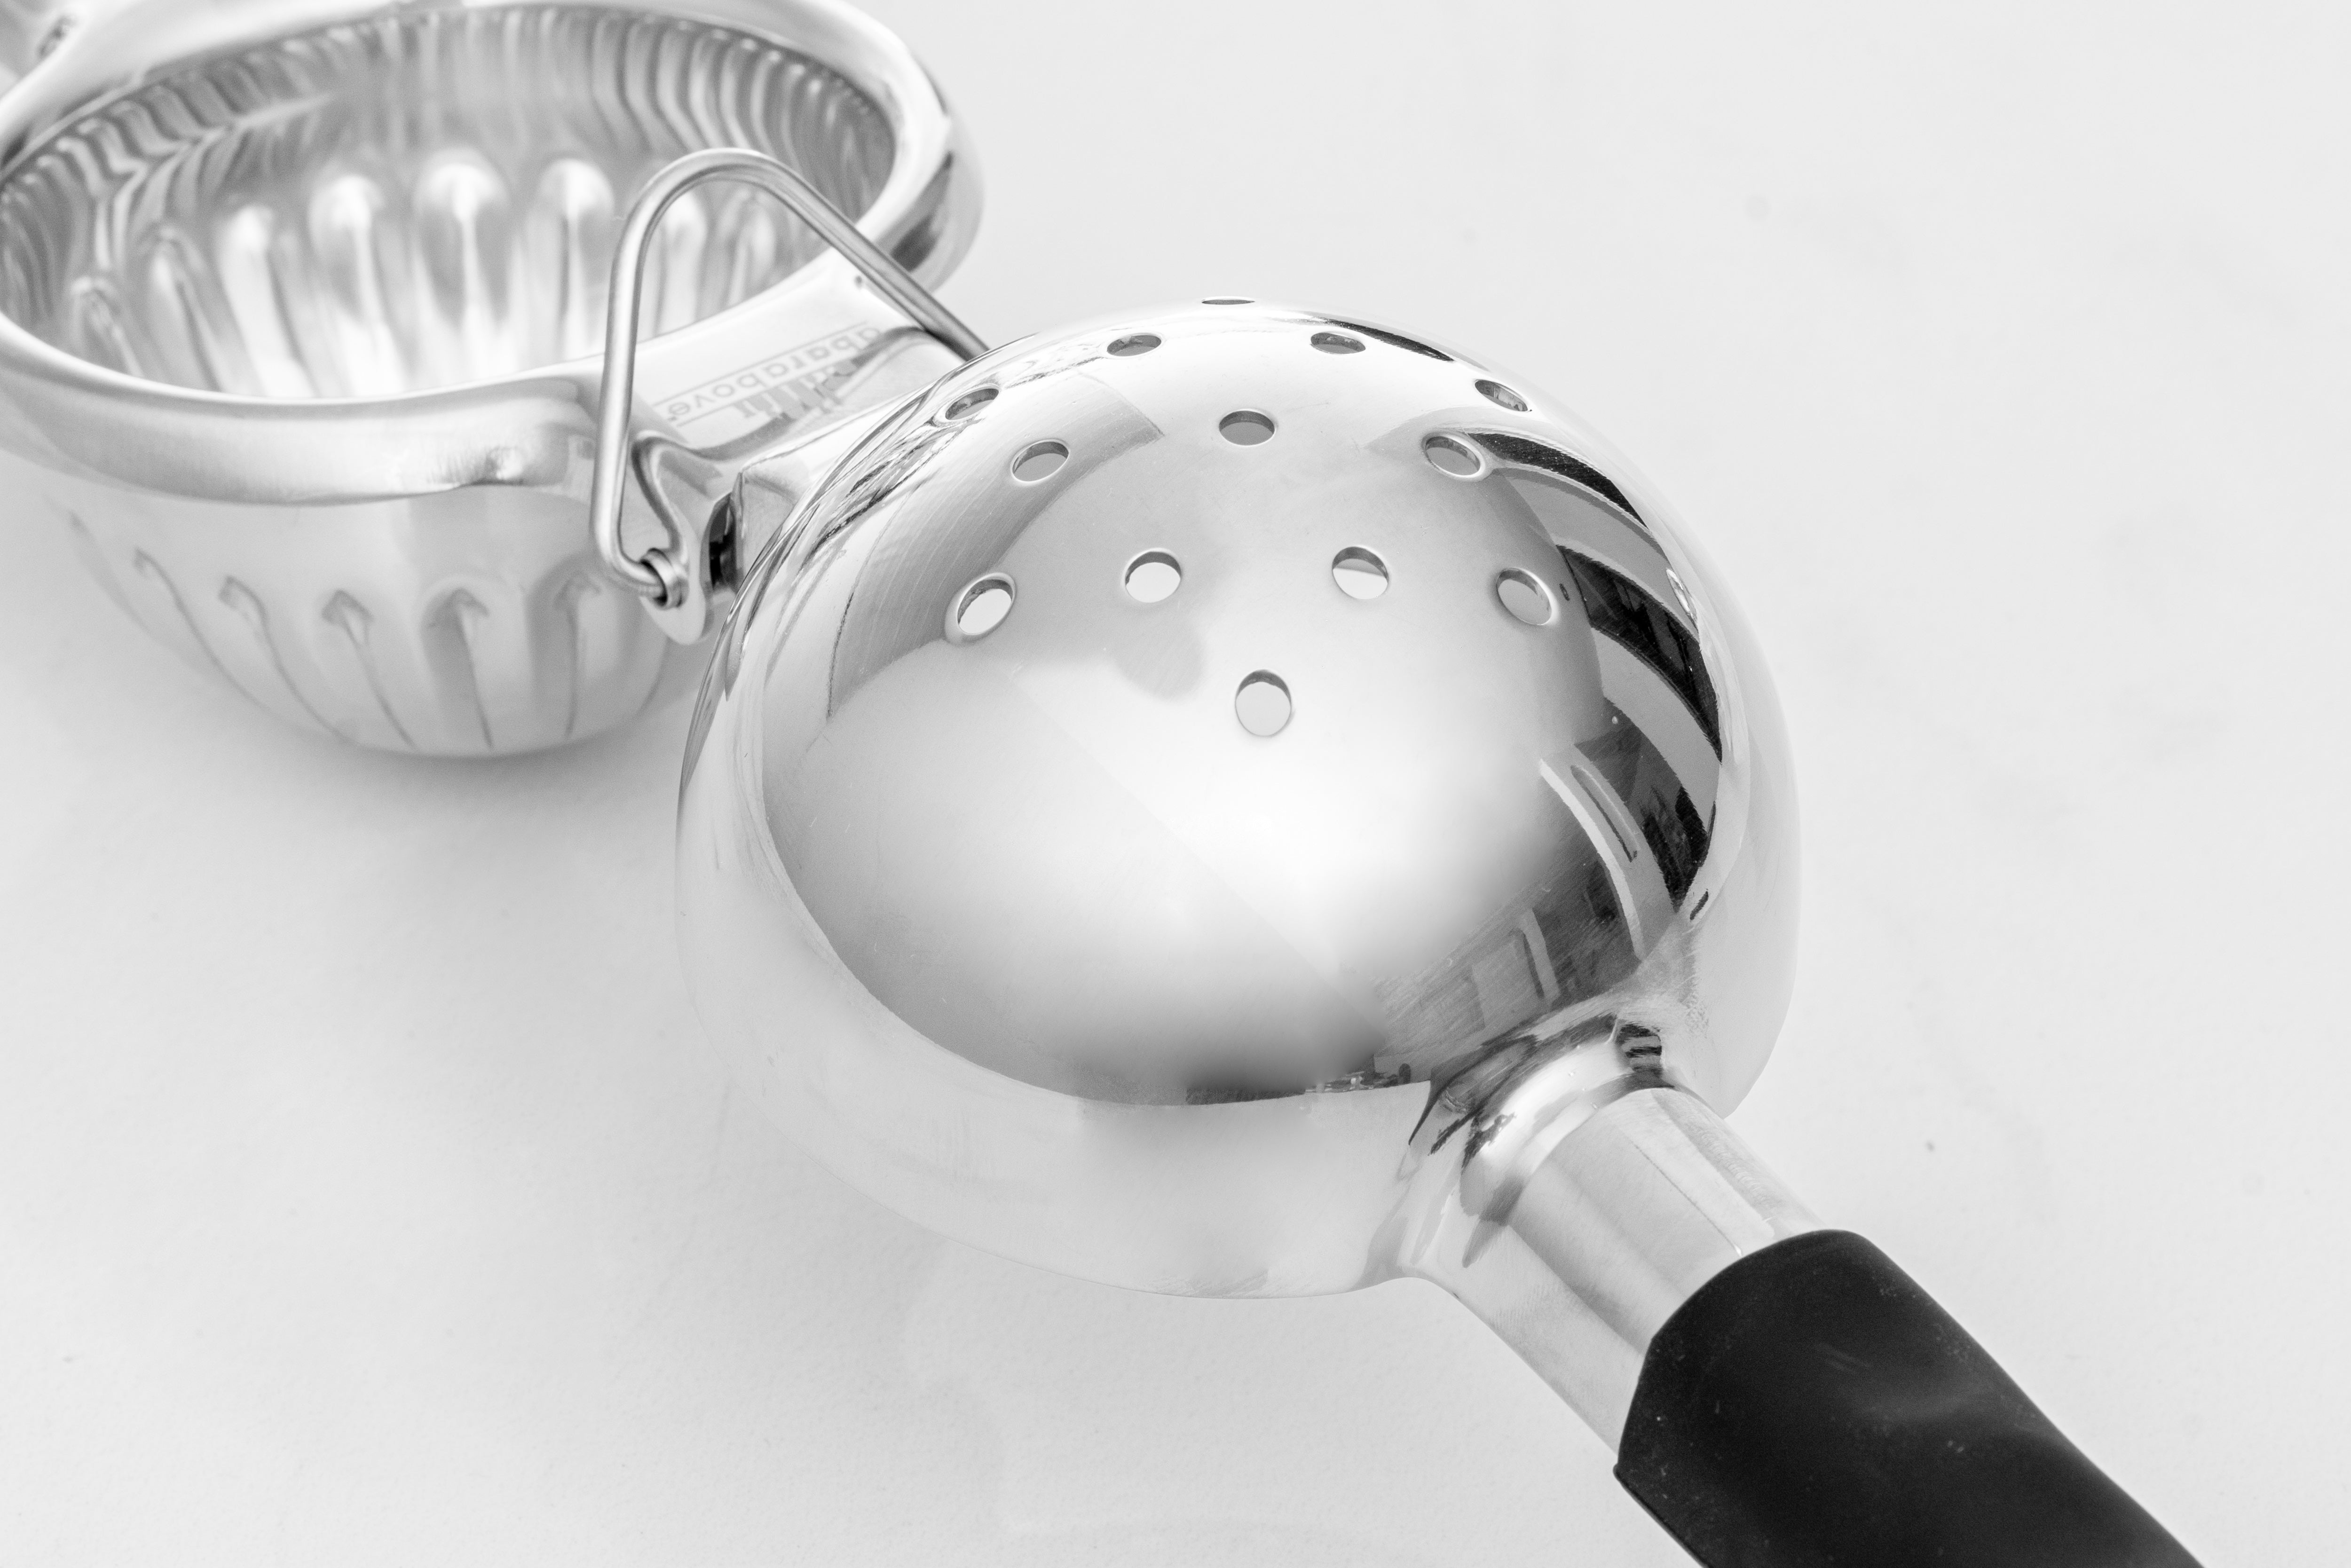 Stainless steel citrus juicer lying open on a white background, showing the holes where the juice filters through